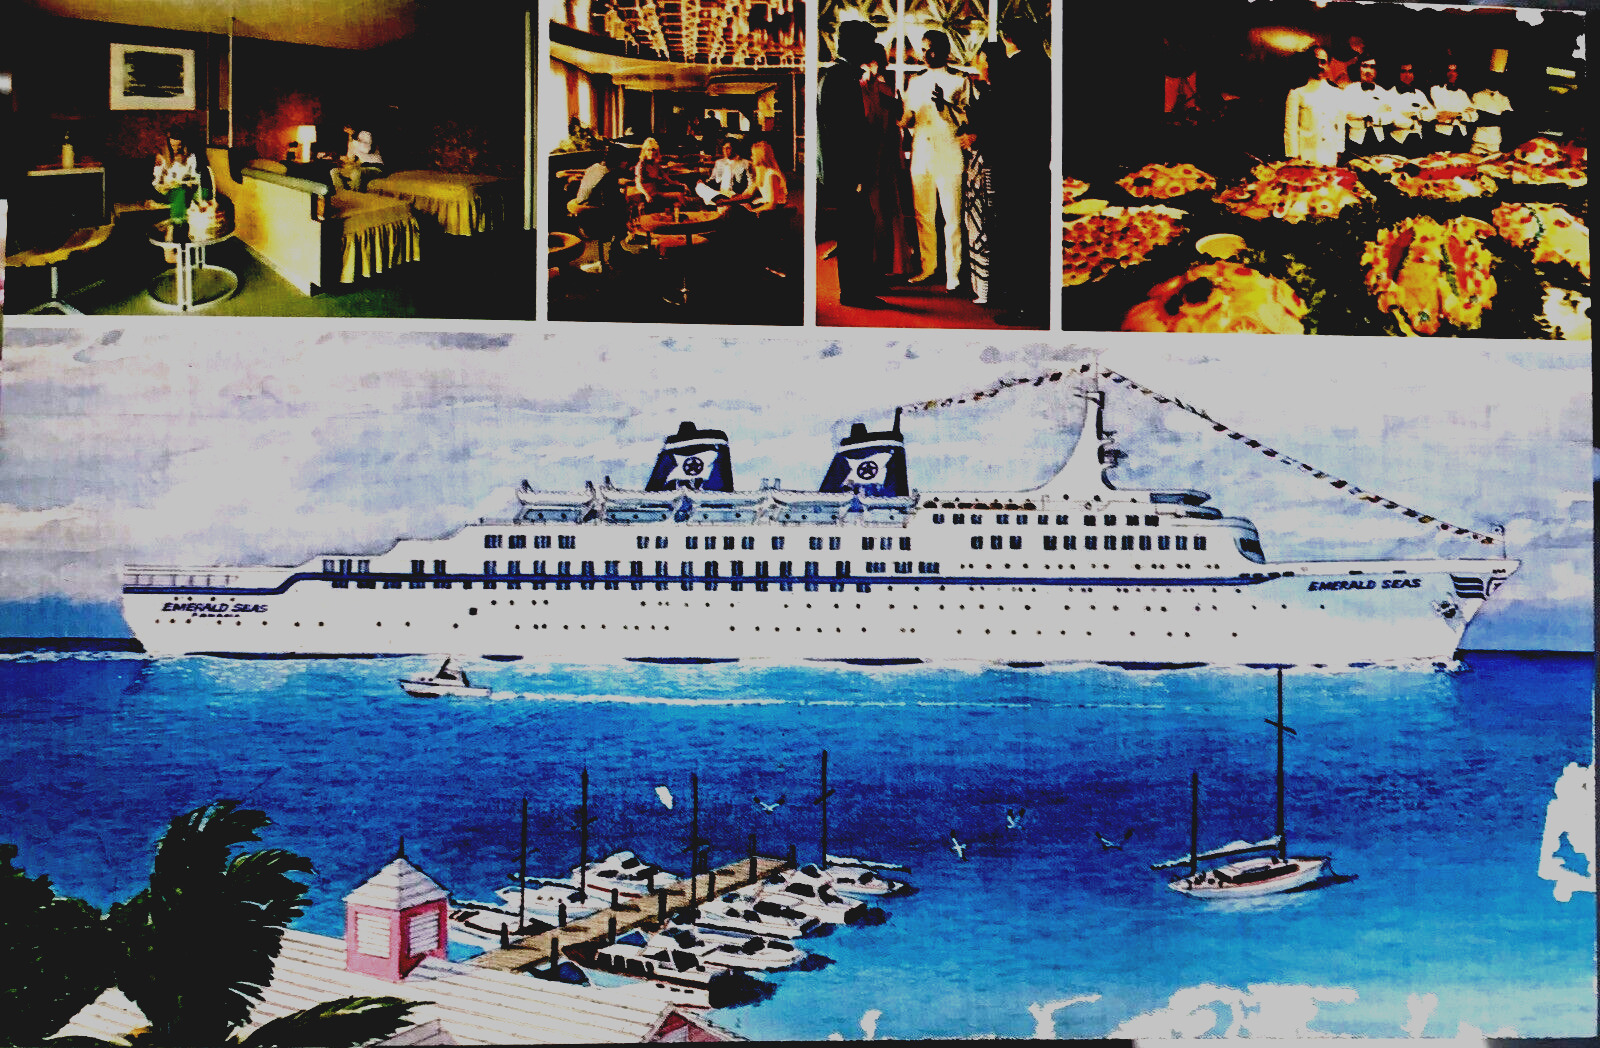 VTG Collectable: 1970\'s S.S. Emerald Seas Cruise Ship Postcard Unhinged/Unposted